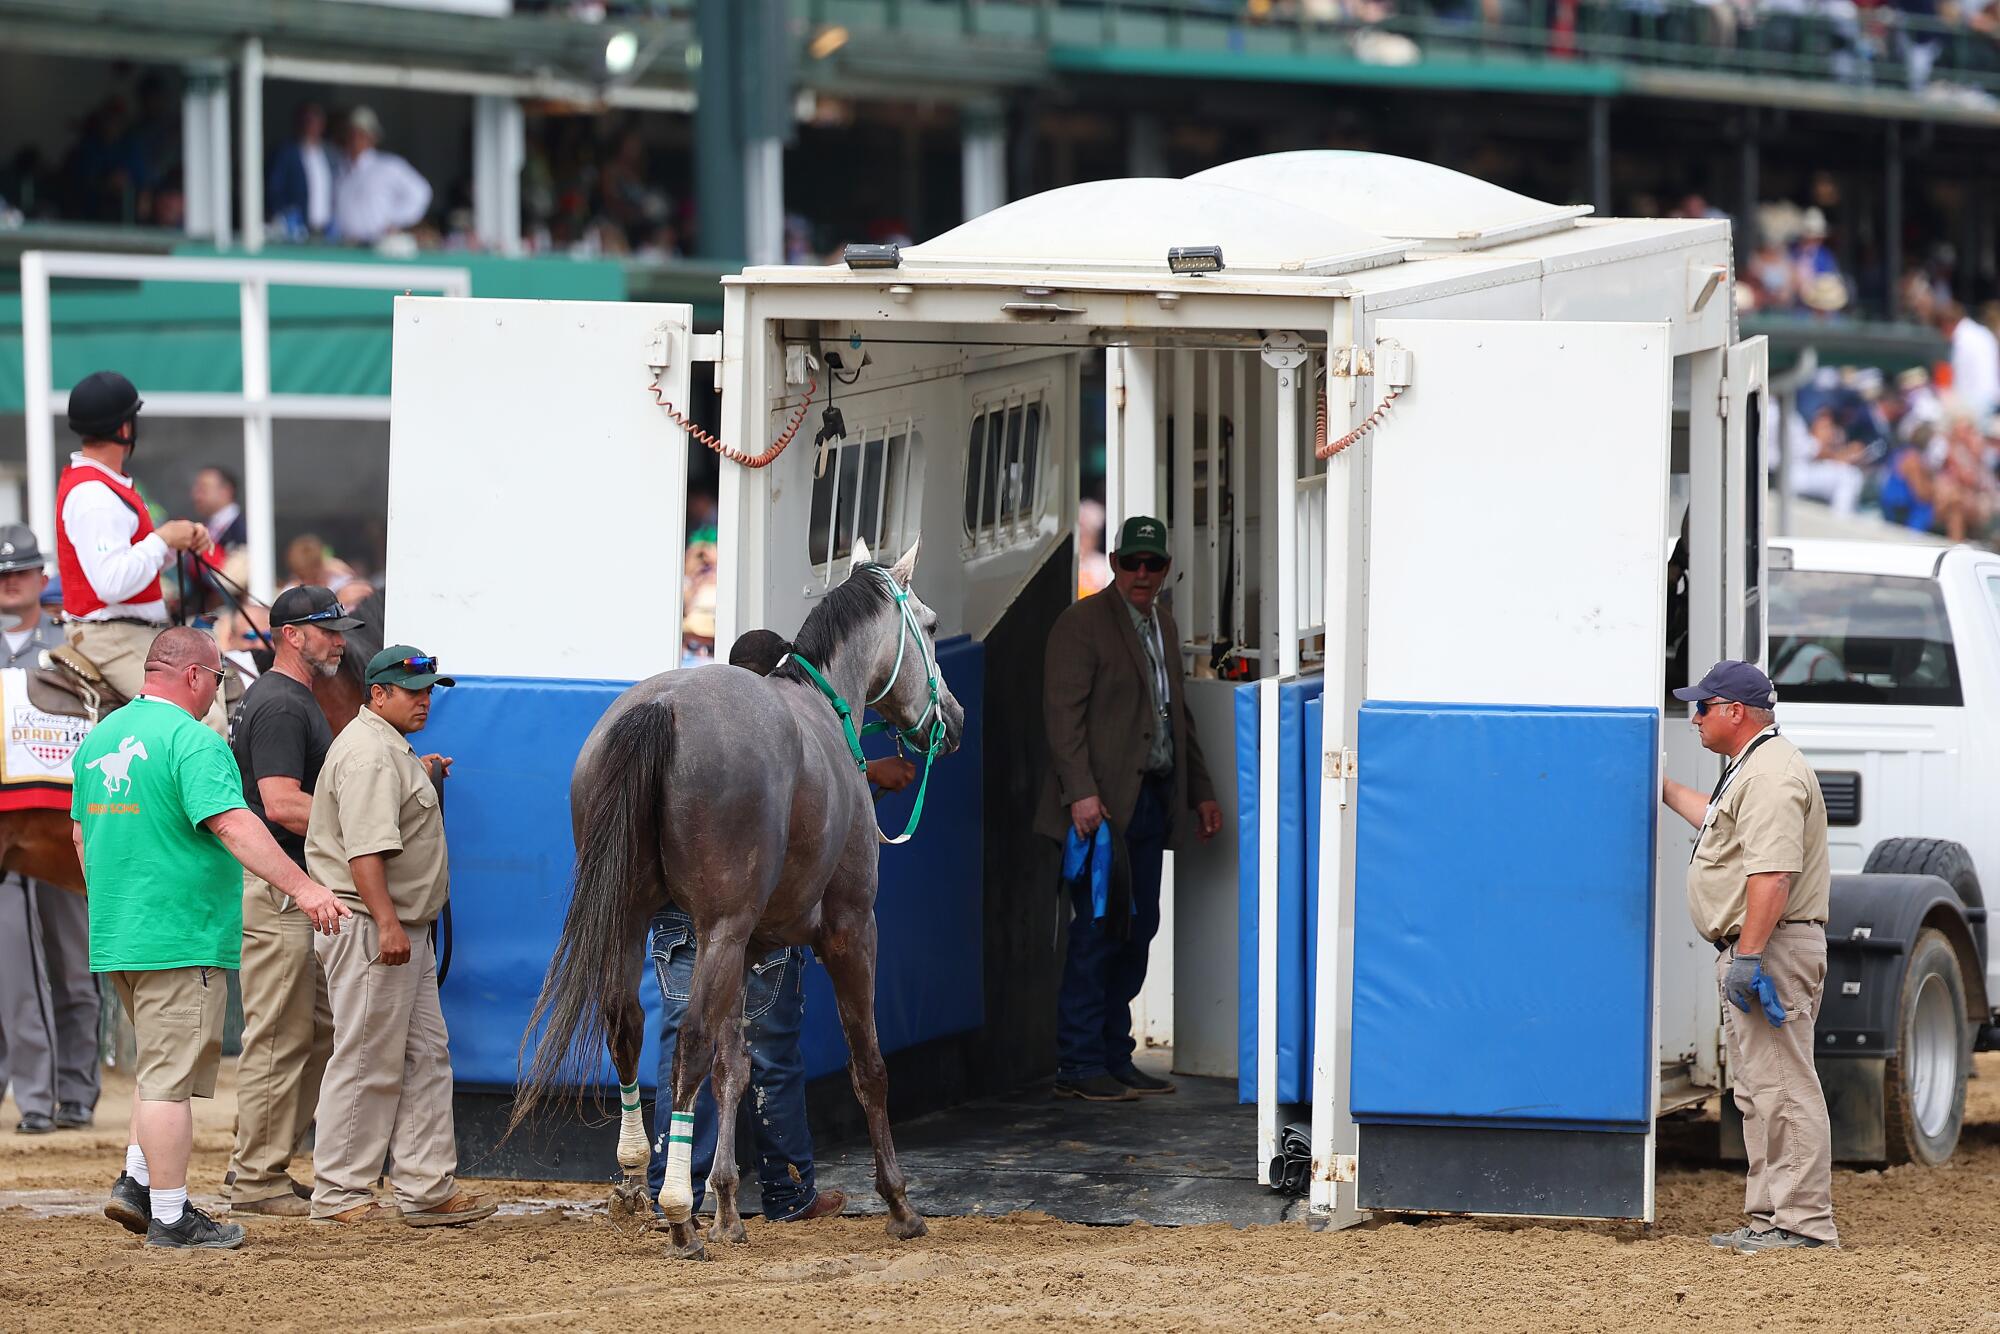 Here Mi Song is lead into a equine ambulance after racing at Churchill Downs.